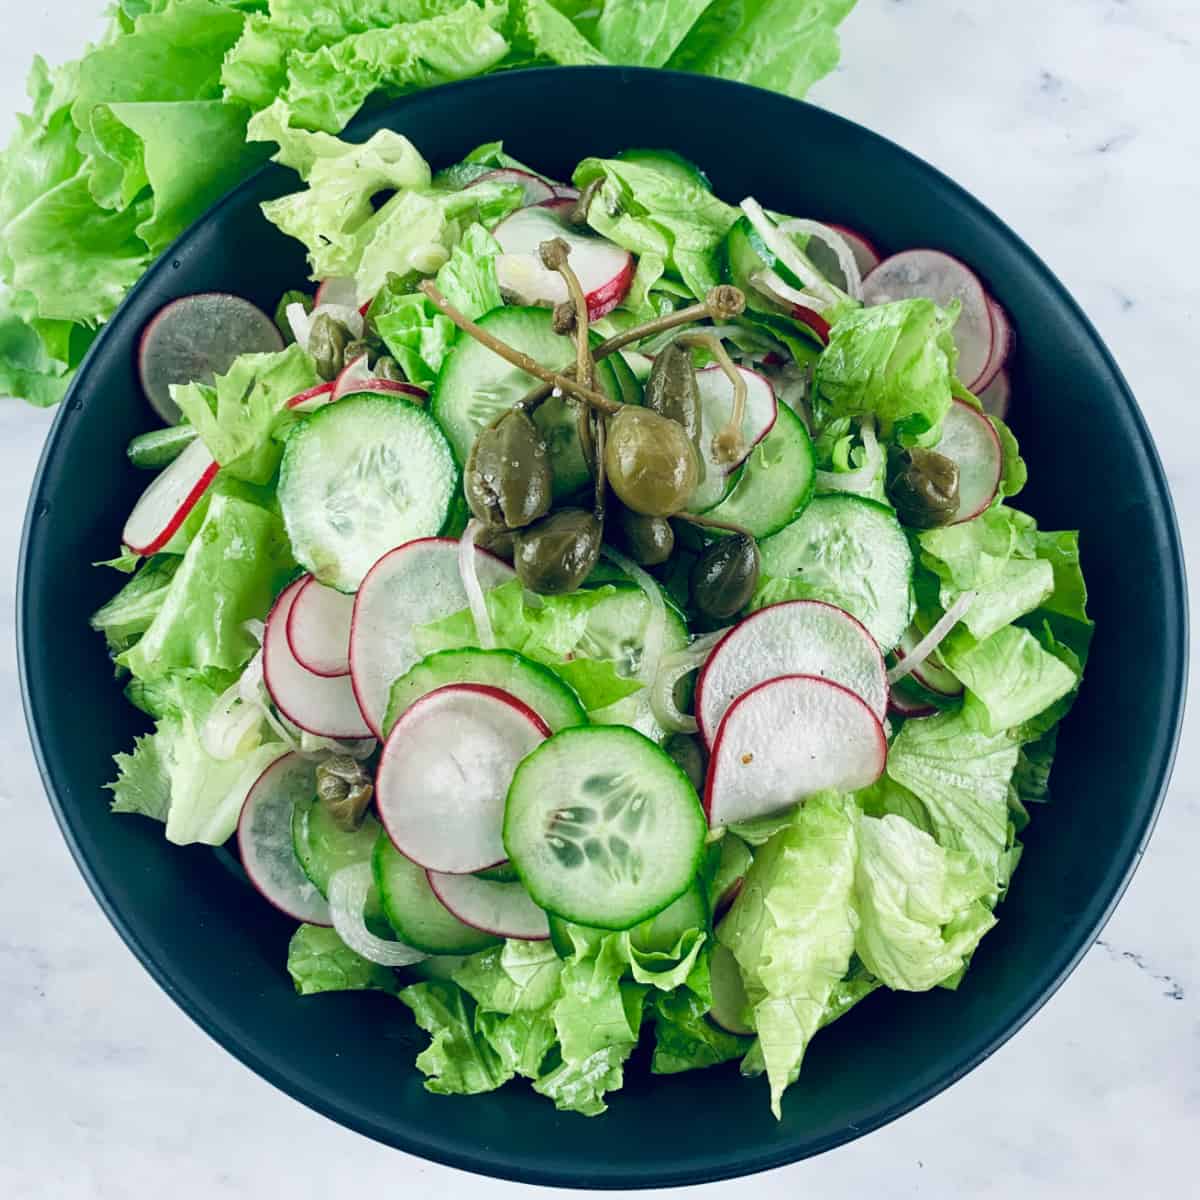 GREEN CORAL SALAD IN A BLACK BOWL WITH CURLY LETTUCE ON THE SIDE